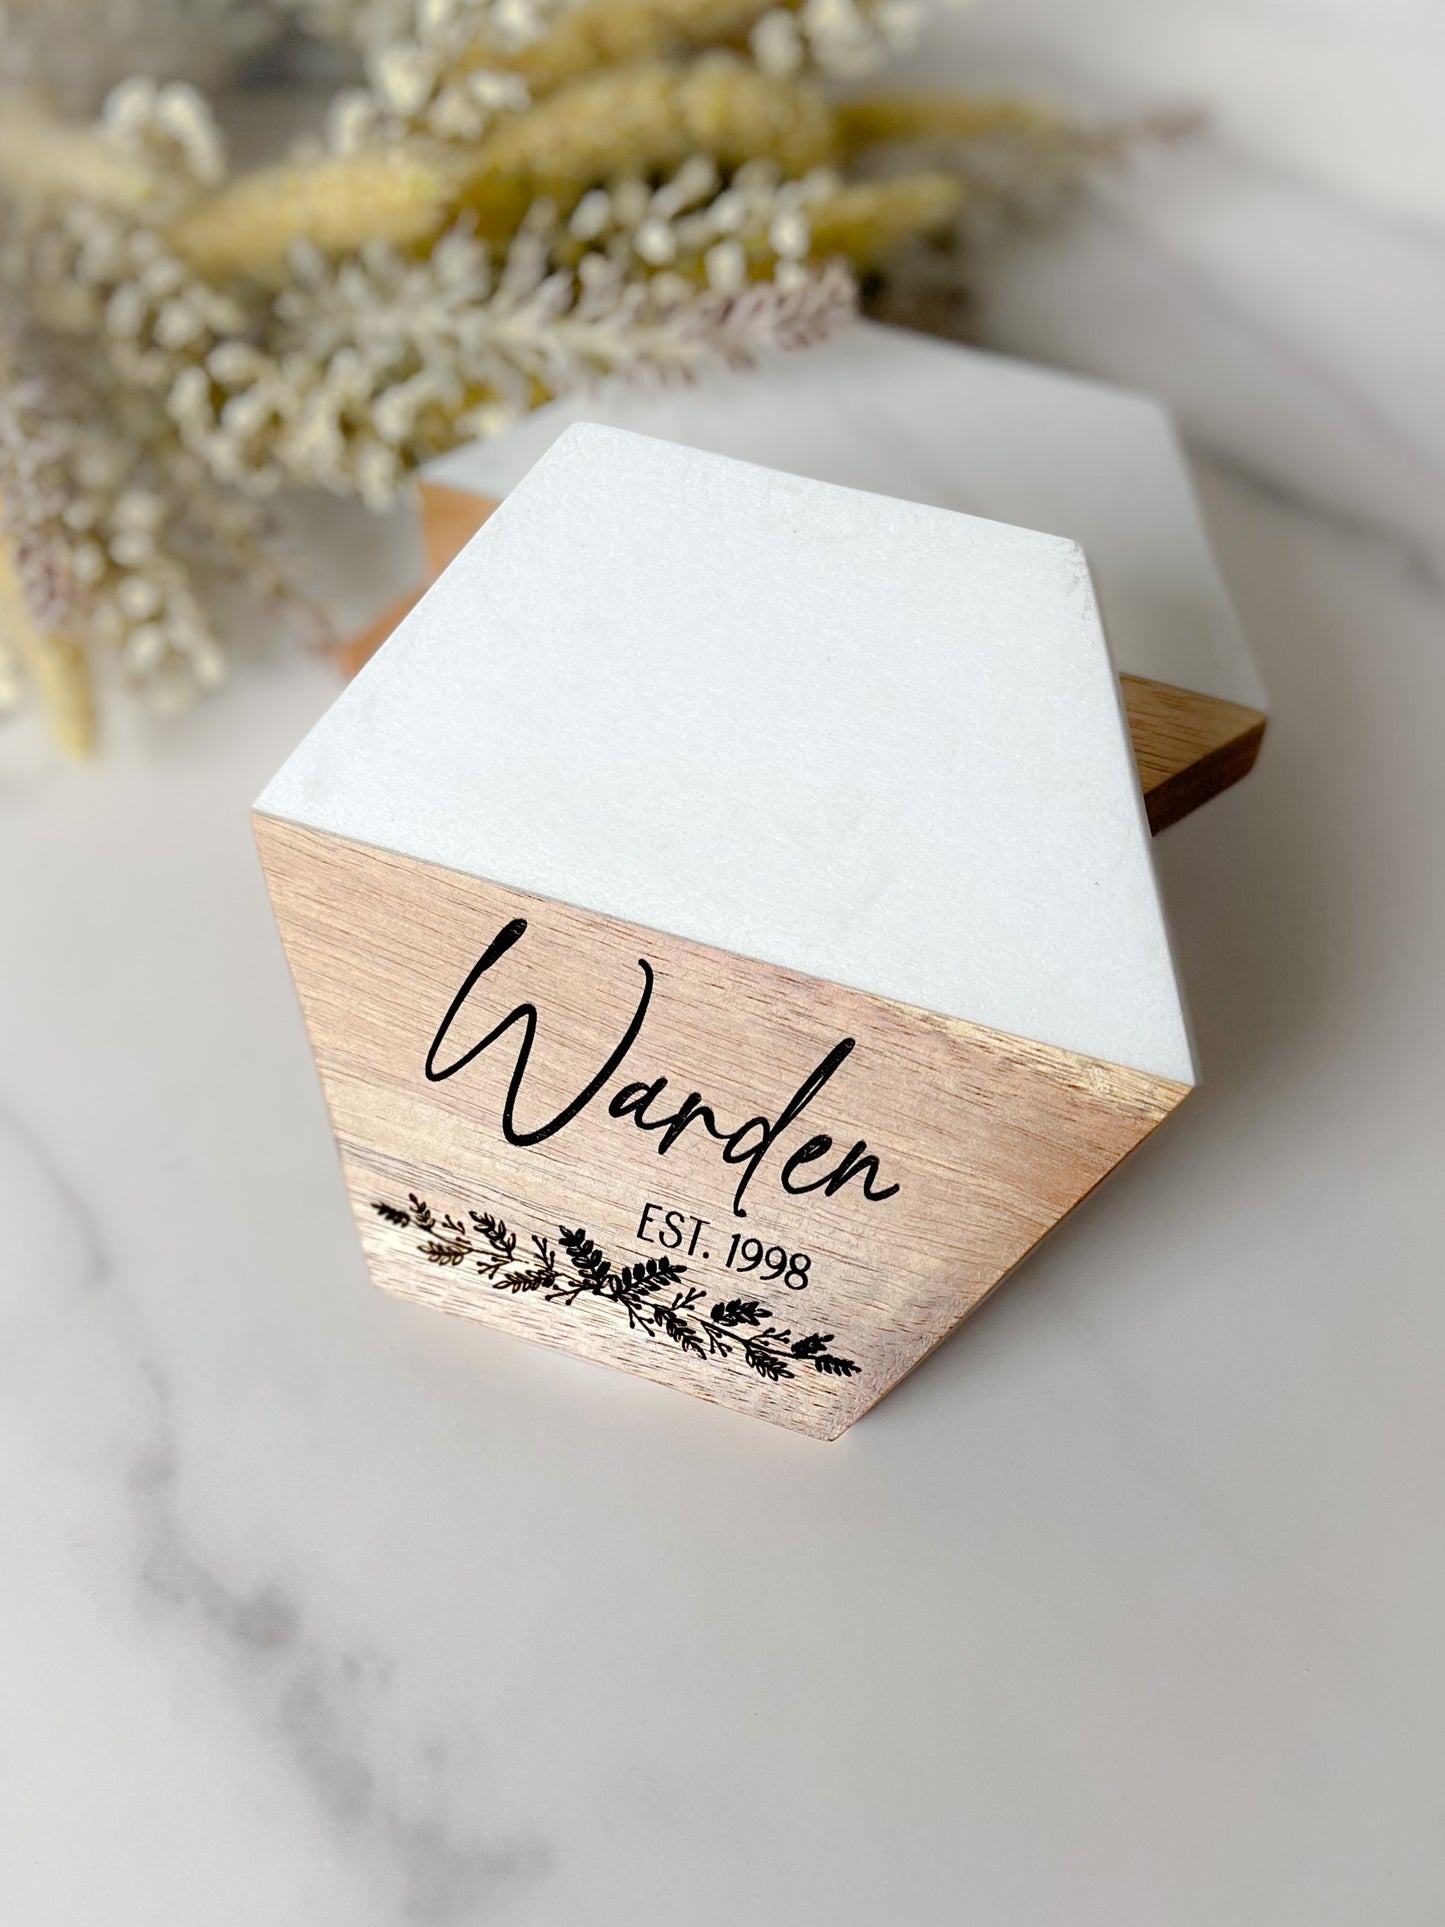 Personalized Marble and Wood Coasters